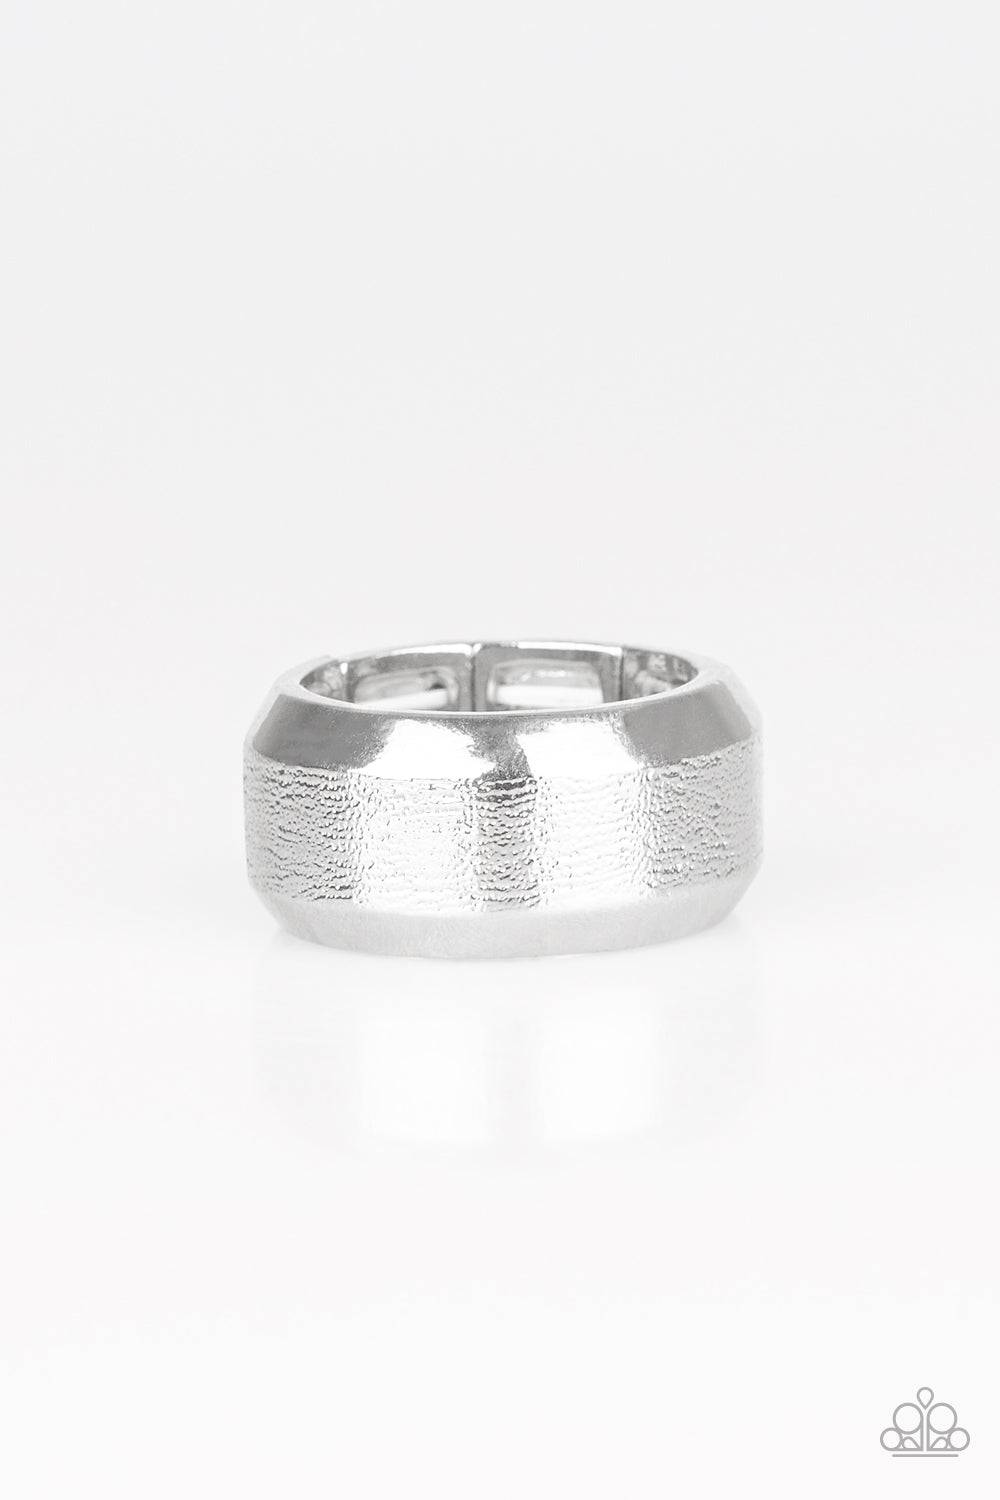 Checkmate - Silver Urban Ring